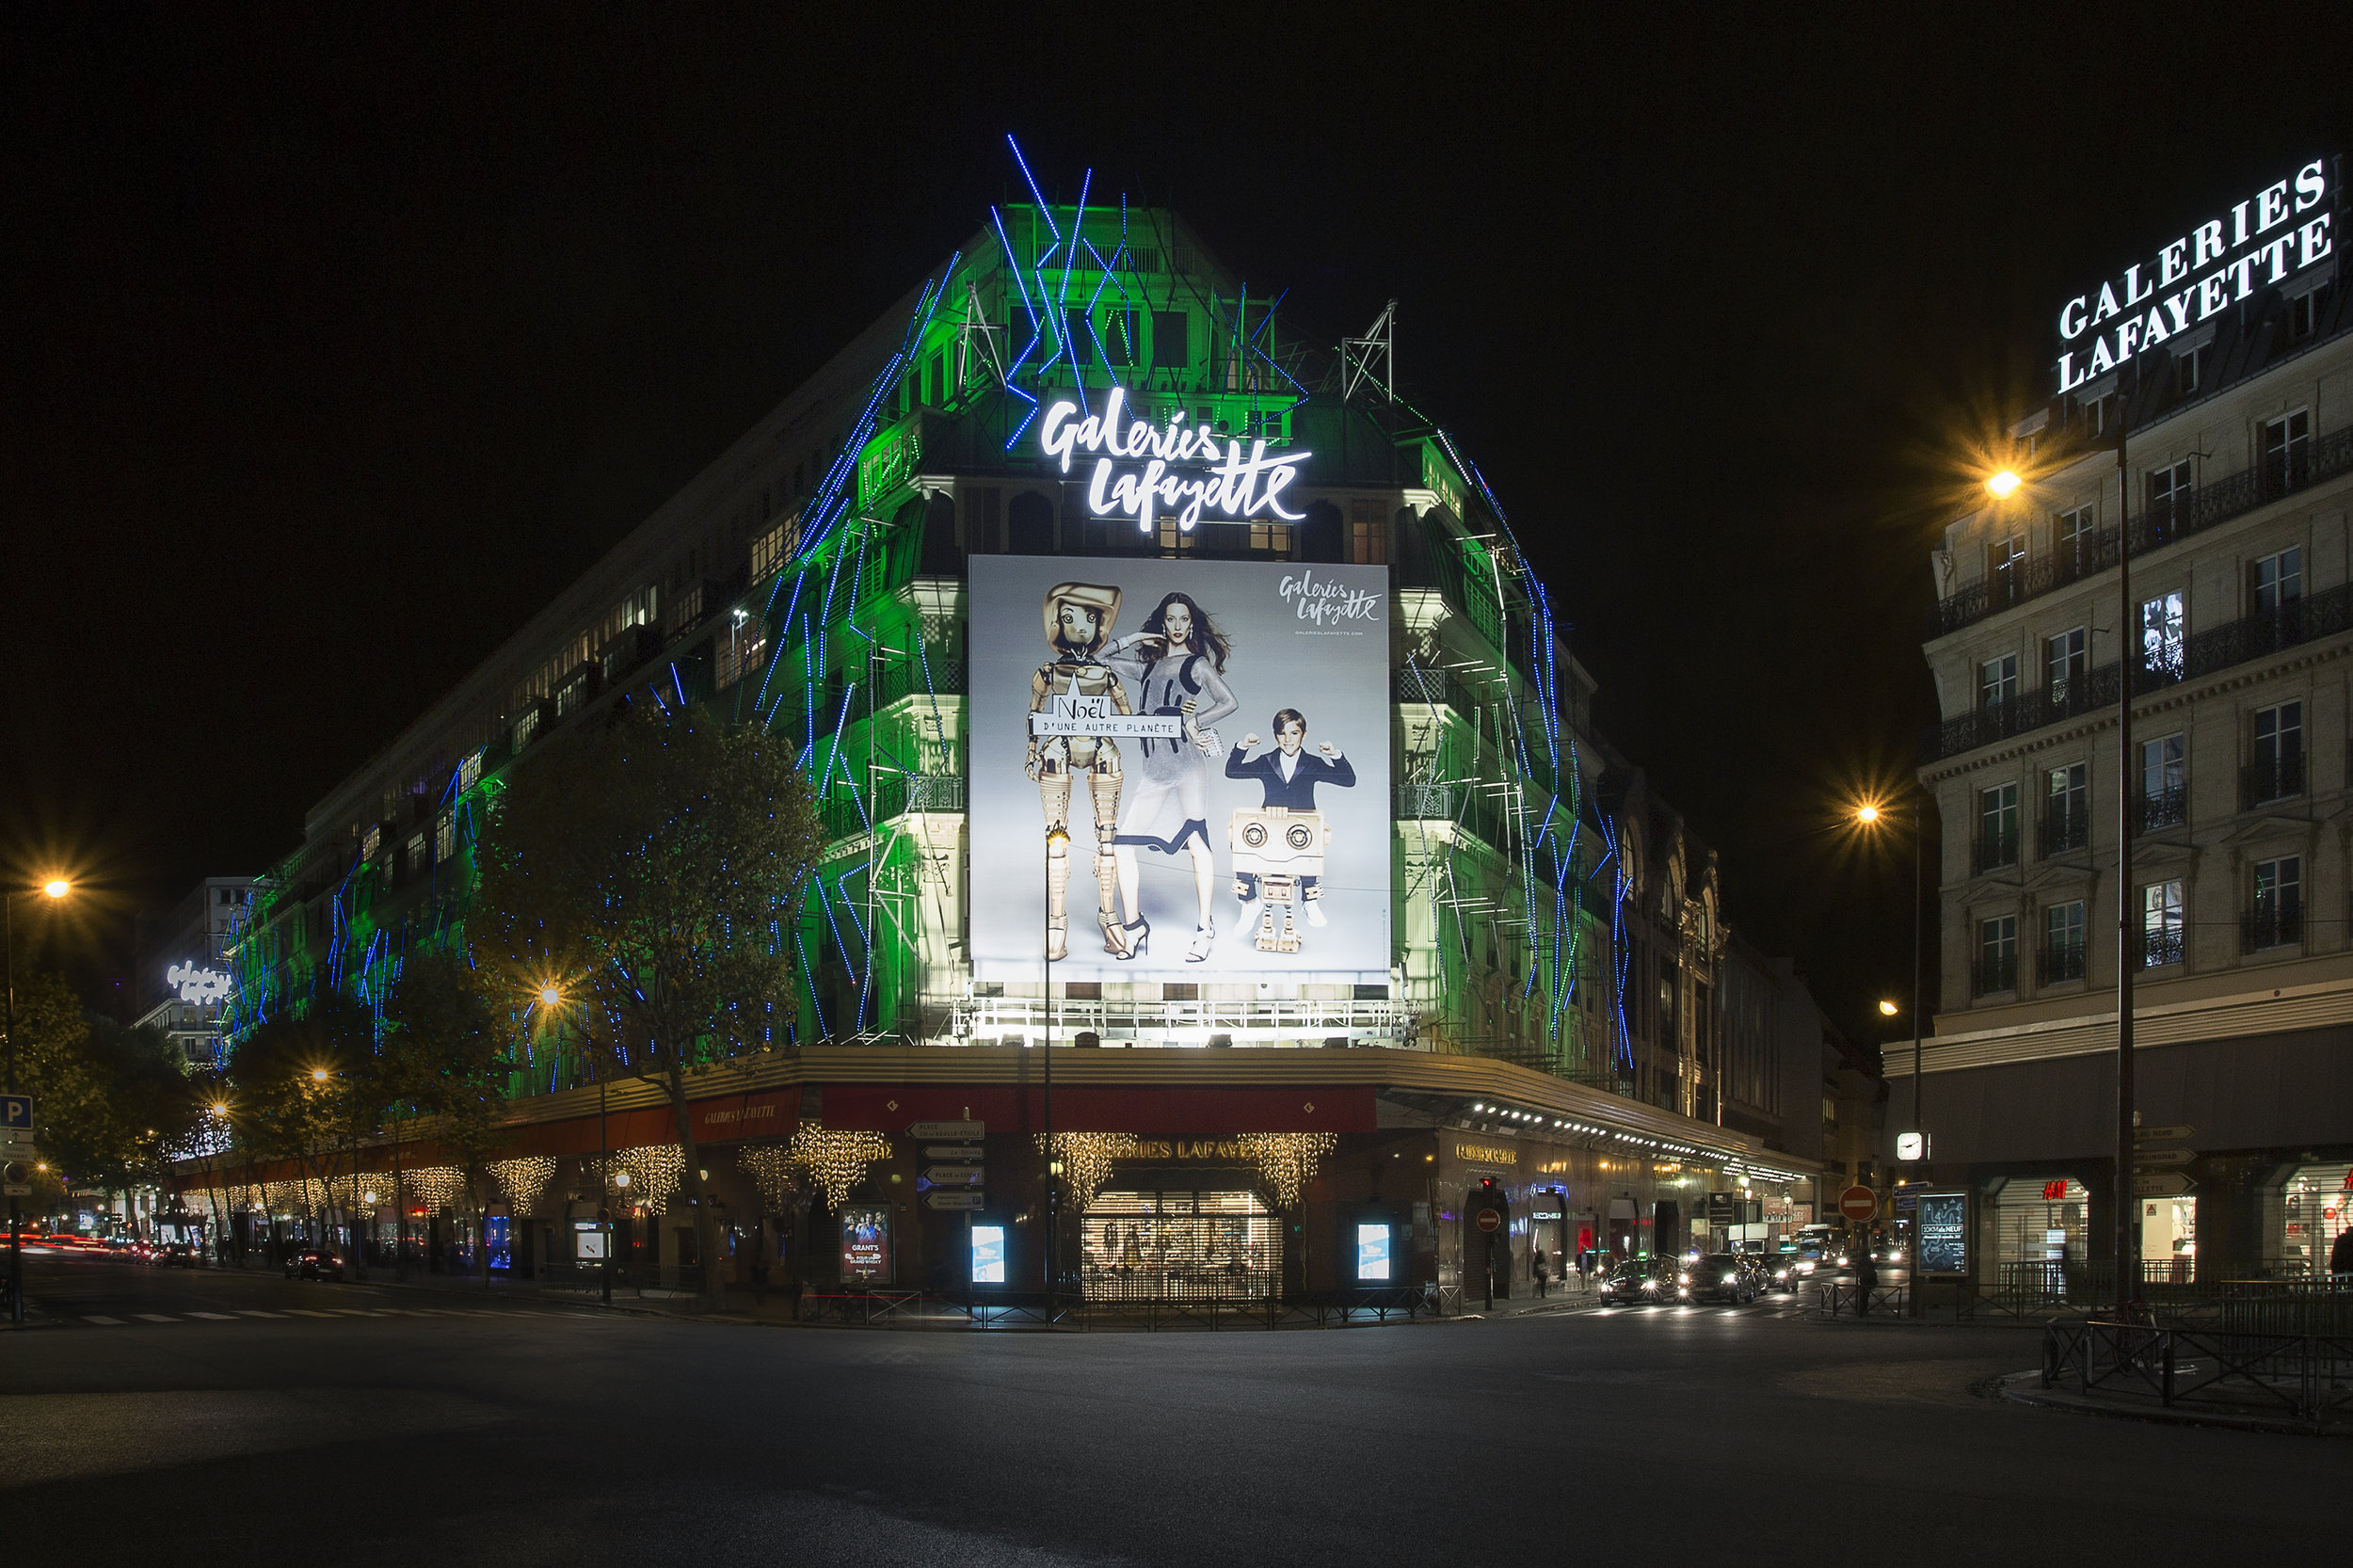 Our brands — Galeries Lafayette Group